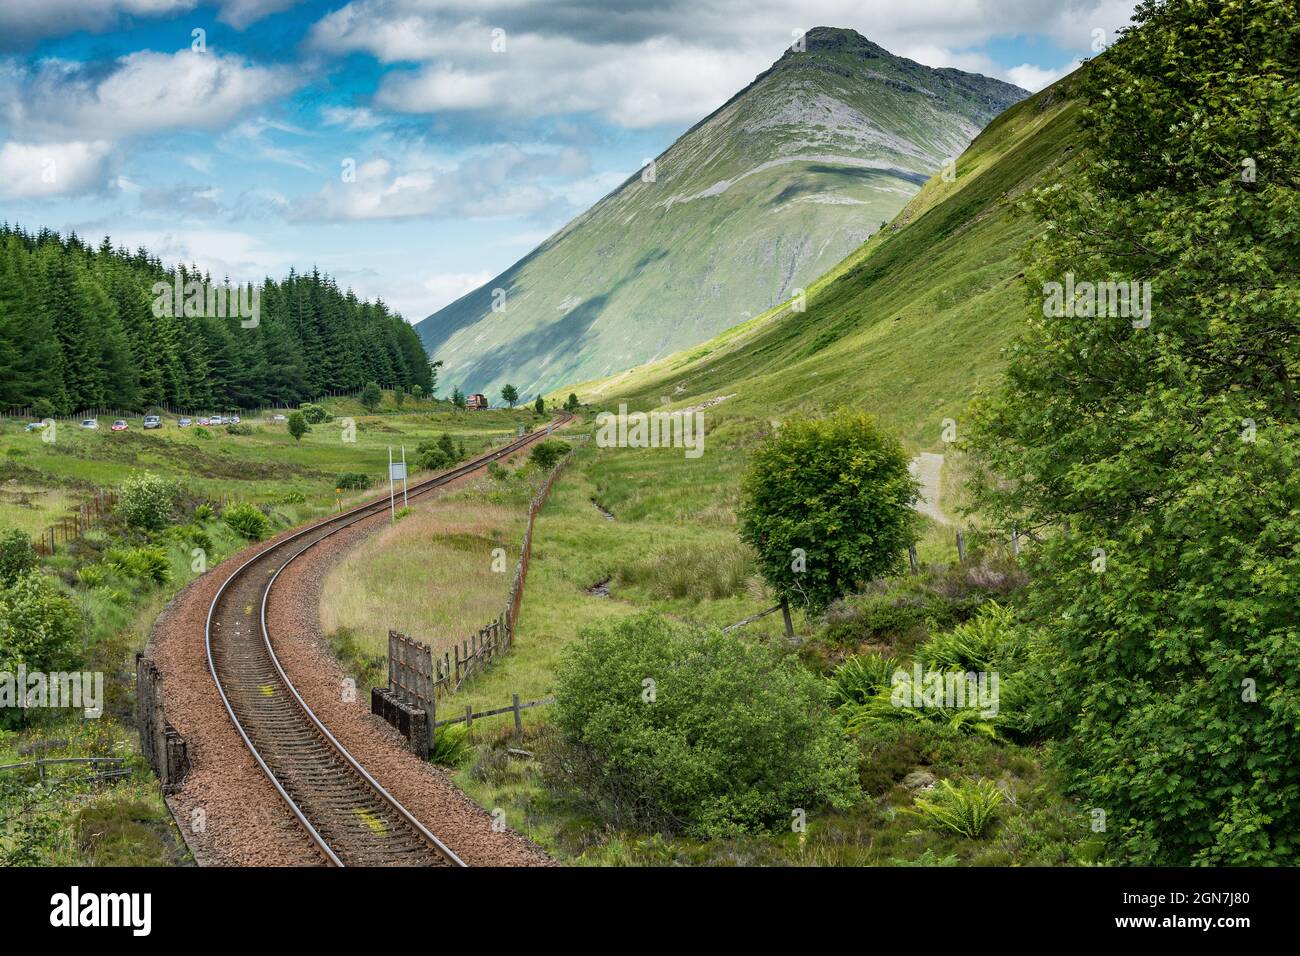 Along the West highland Way in Scotland. a view of the Milngavie - Fort William railway line and of Beinn Dorain mountain Stock Photo